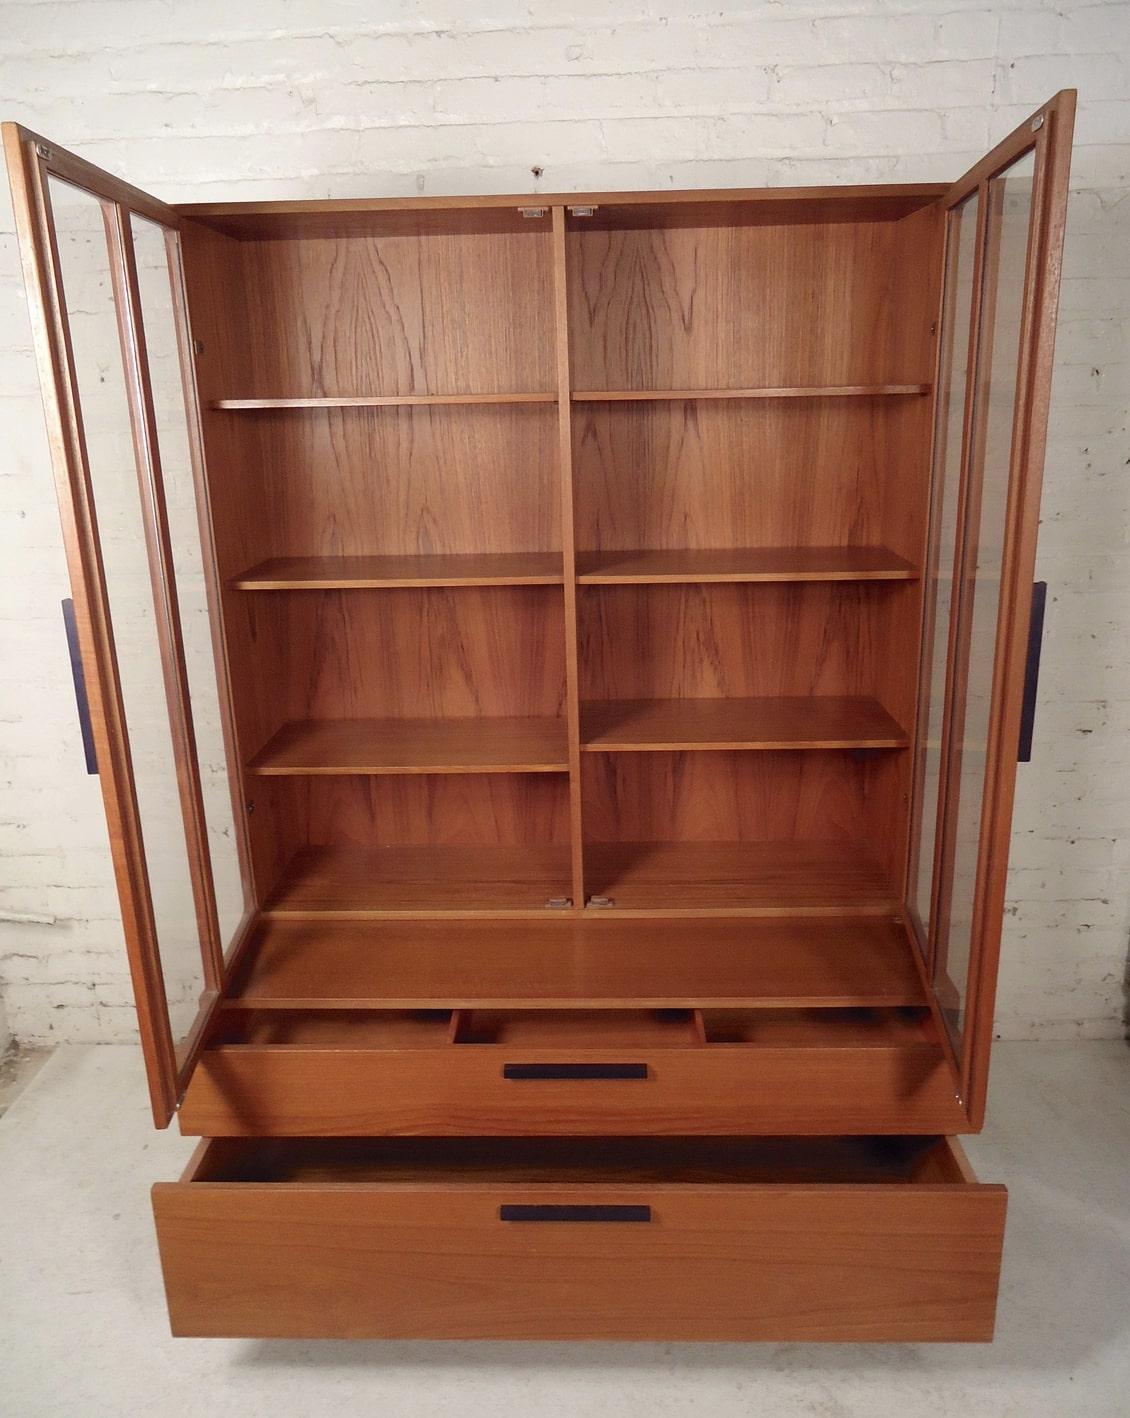 Large two-piece wall unit with bottom wide drawer storage and bookcase topper with glass doors.
(Please confirm item location - NY or NJ - with dealer).
          